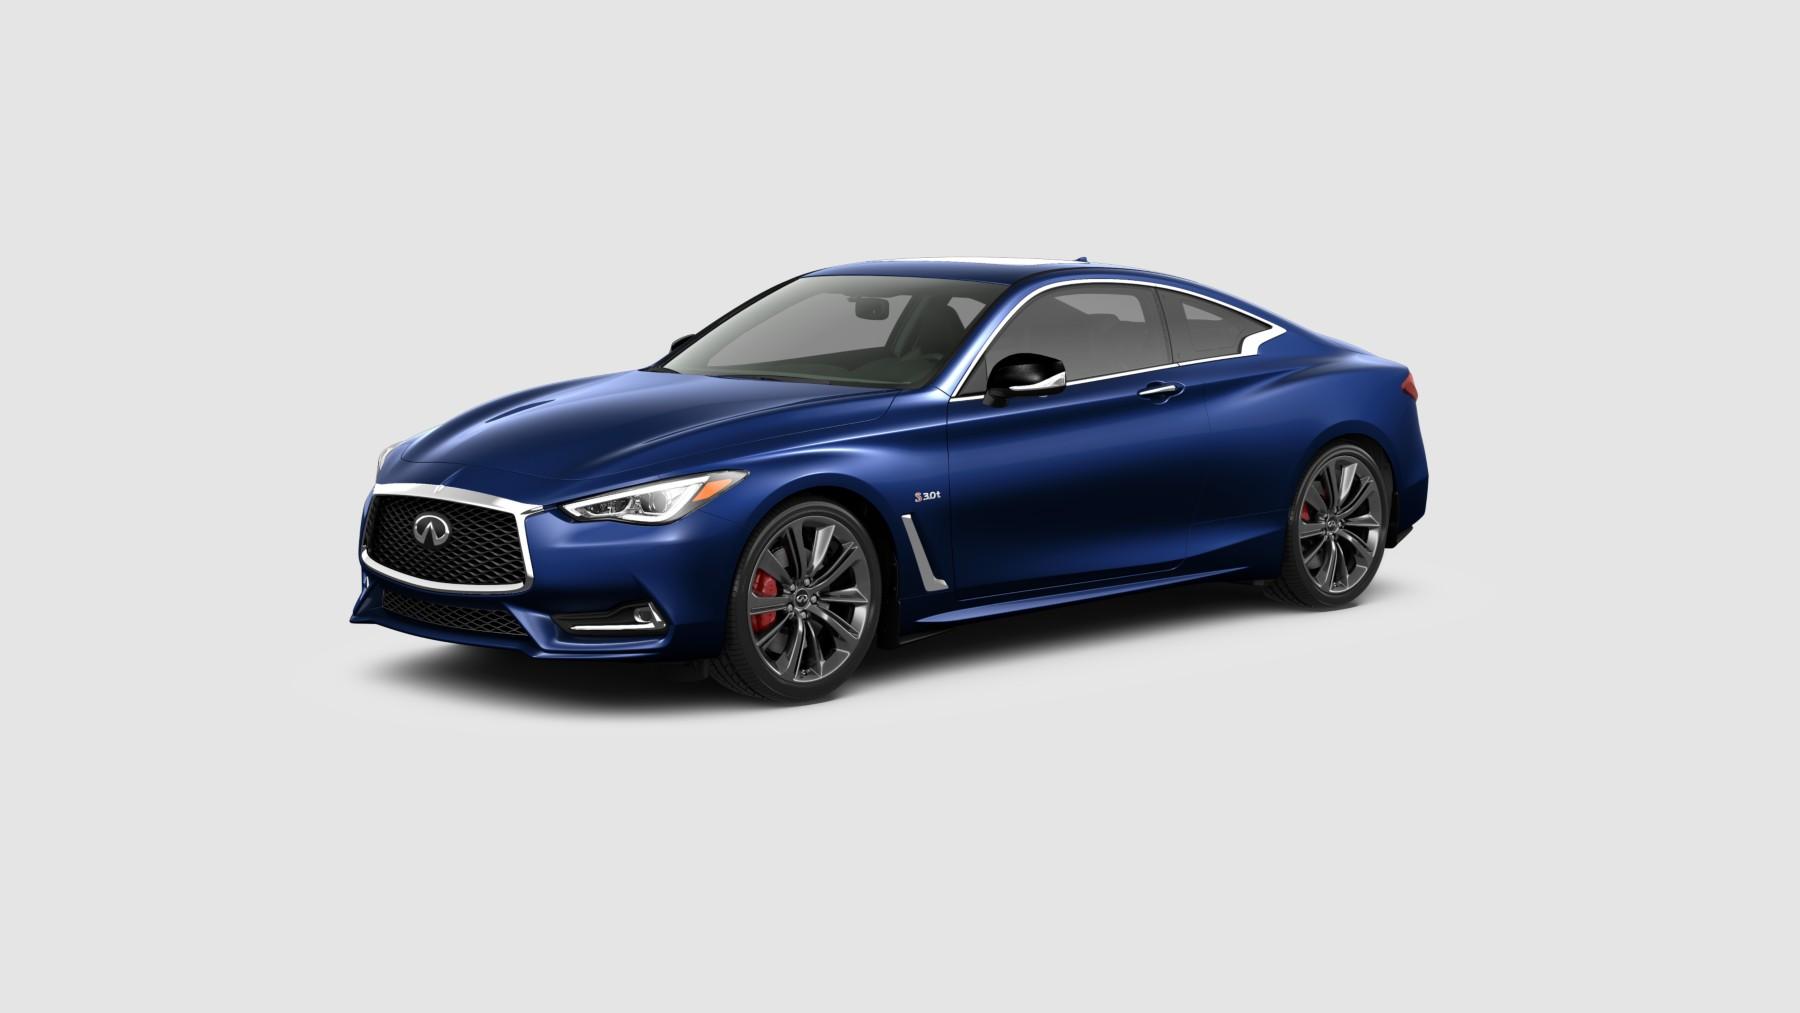 See The Luxurious New 2020 Infiniti Q60 At Infiniti Of